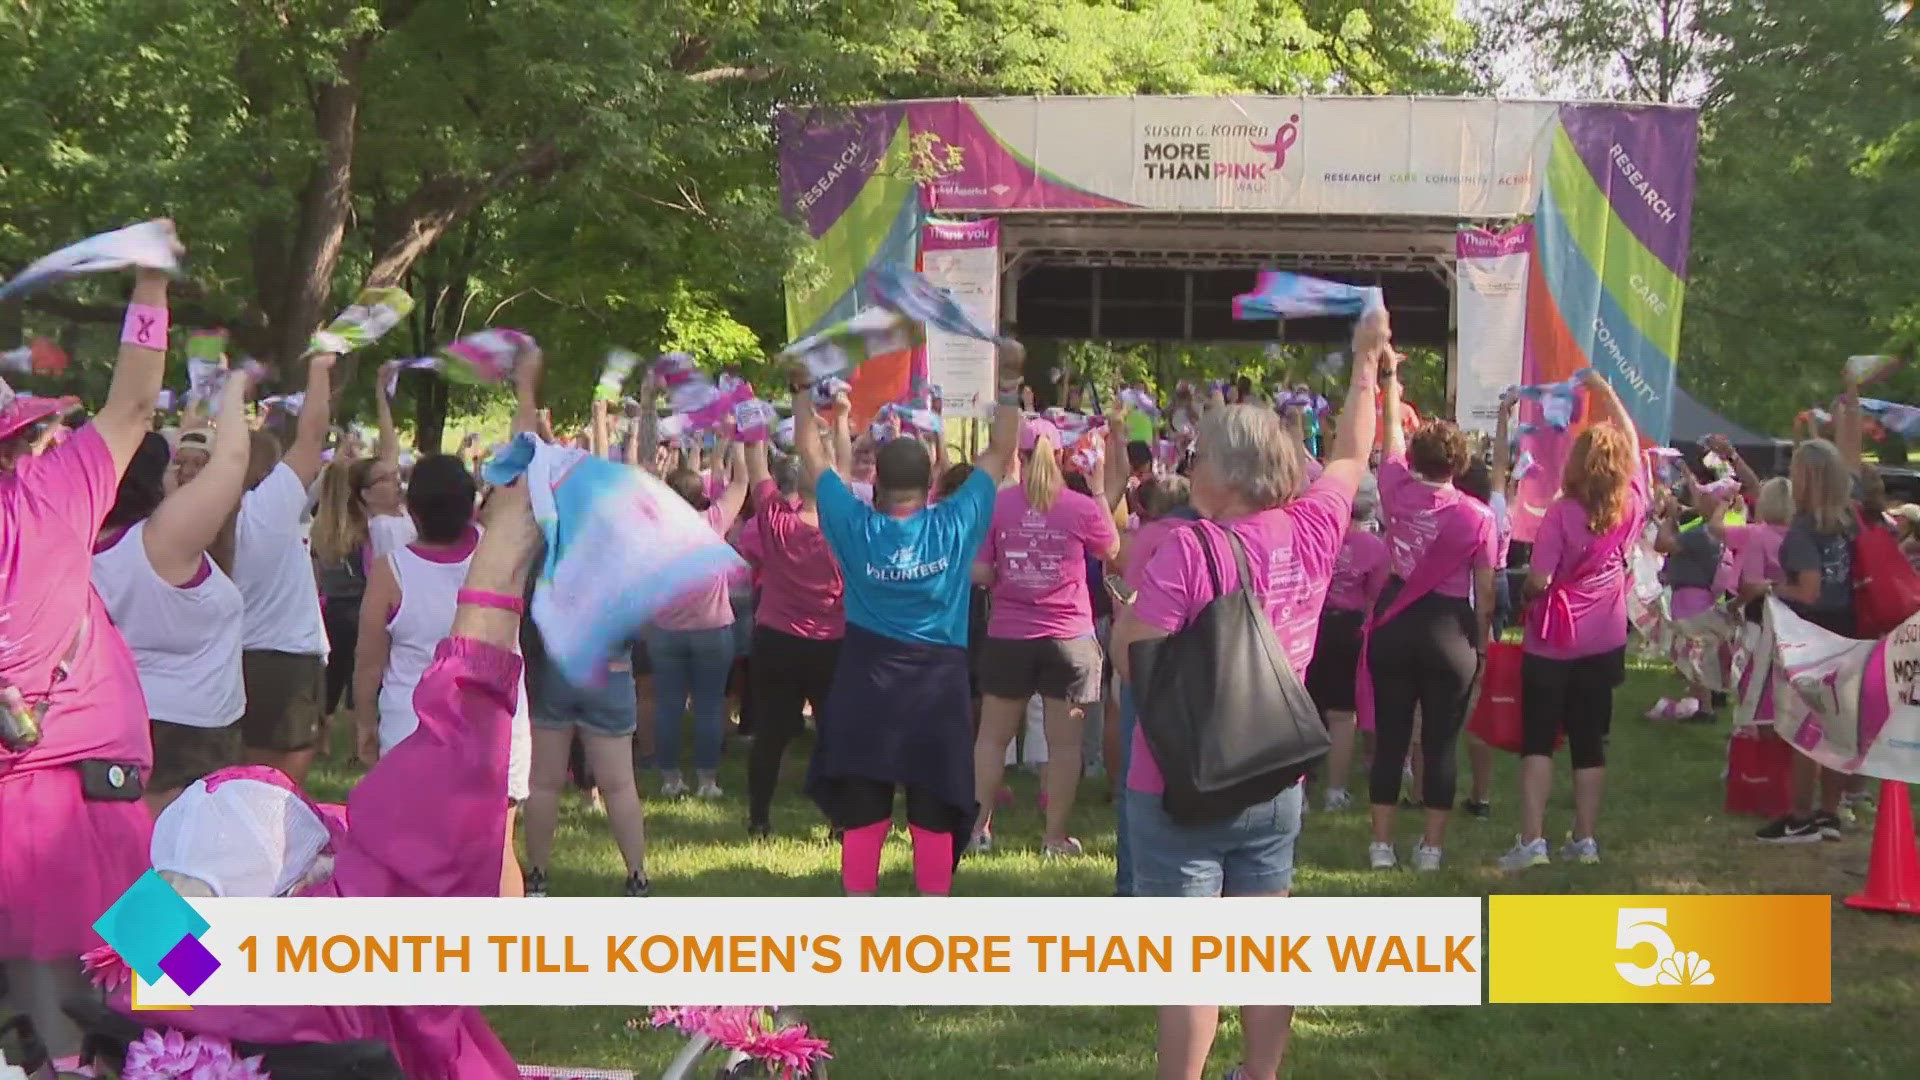 There's still time to register and volunteer at this year's More than Pink Walk.